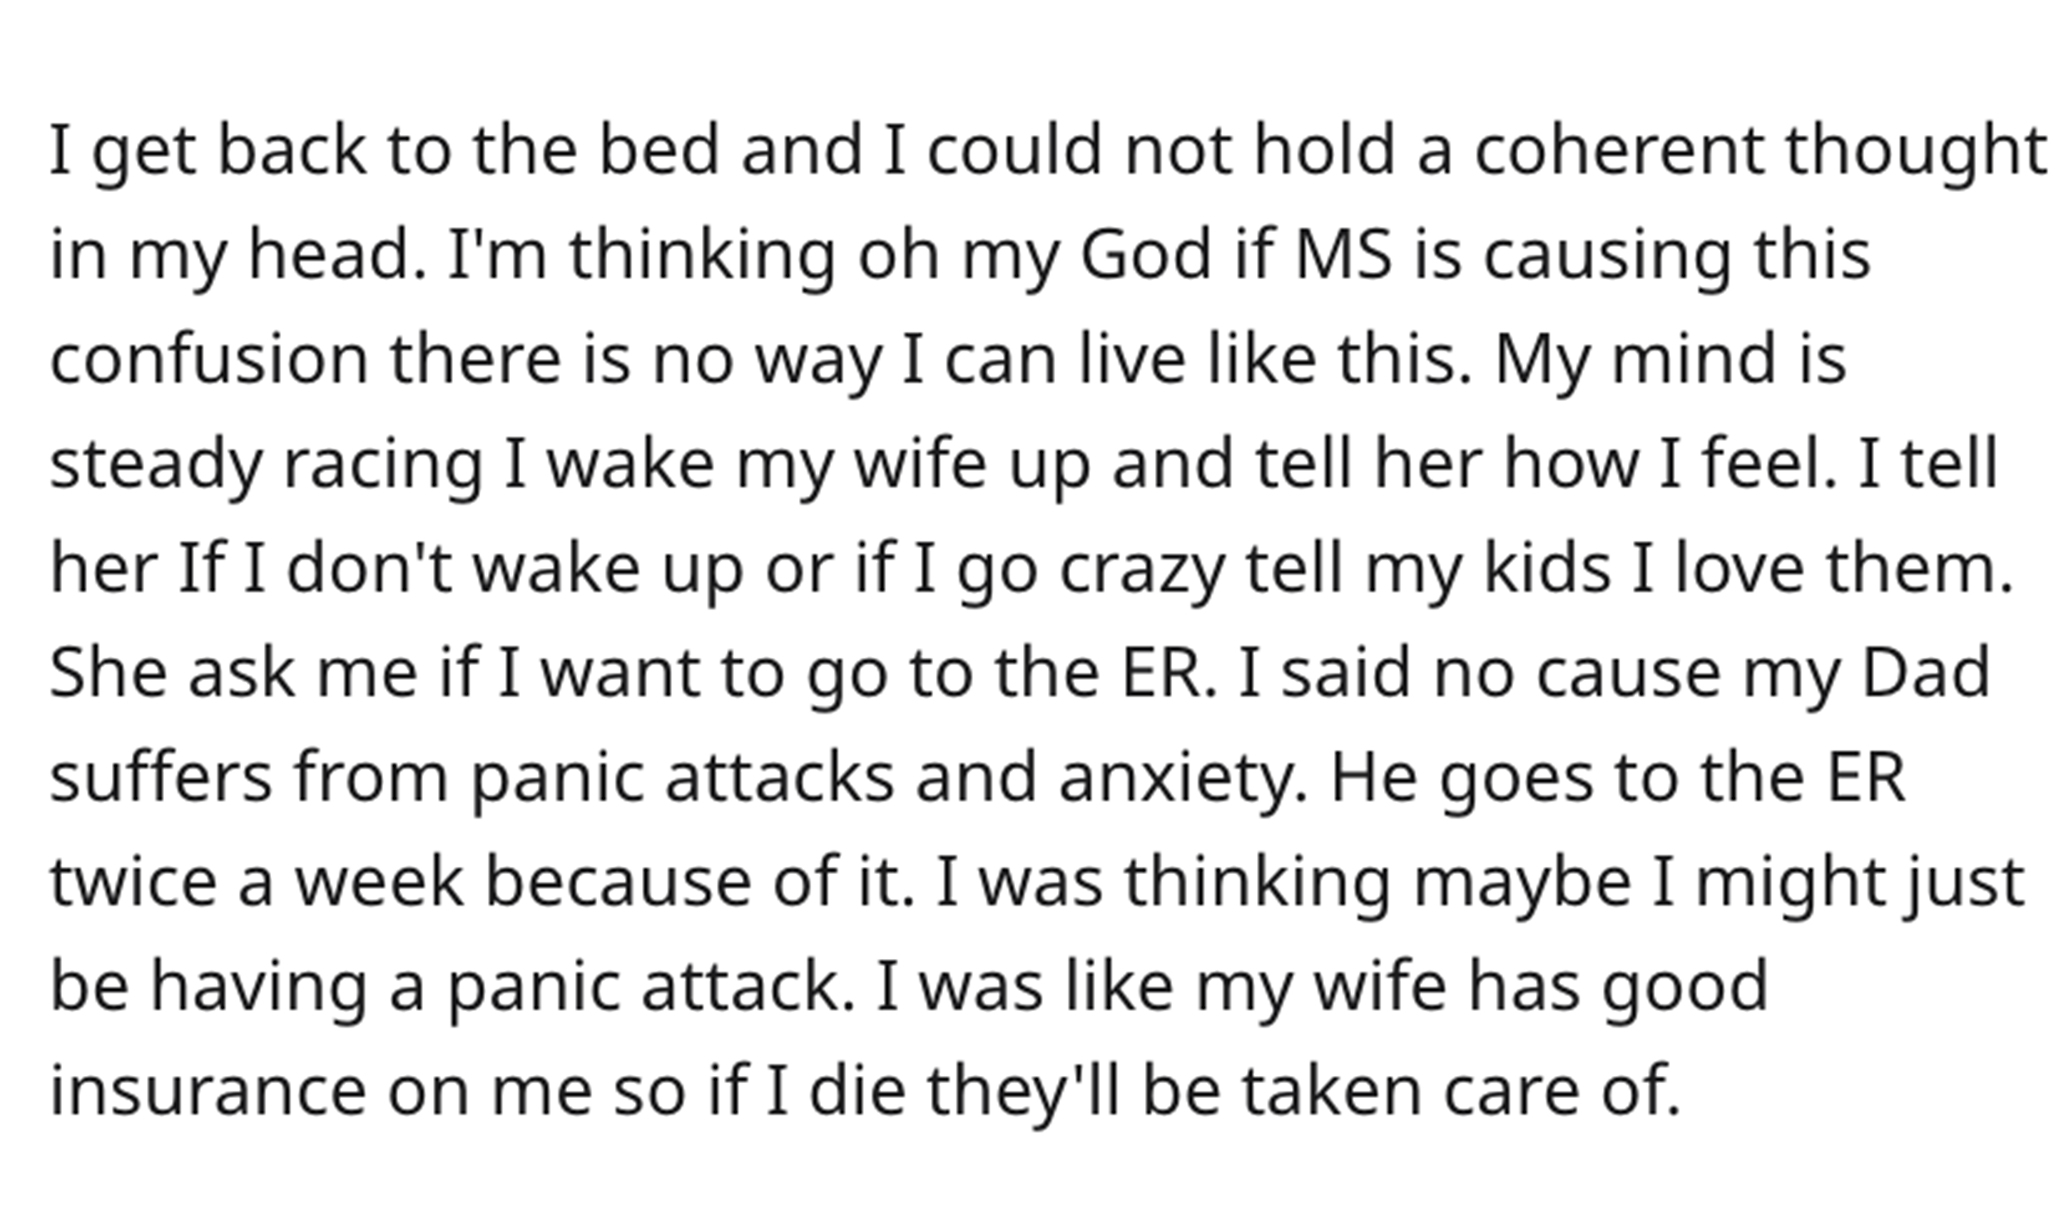 Stoney Patch Kids story reddit - love you quotes - I get back to the bed and I could not hold a coherent thought in my head. I'm thinking oh my God if Ms is causing this confusion there is no way I can live this. My mind is steady racing I wake my wife up